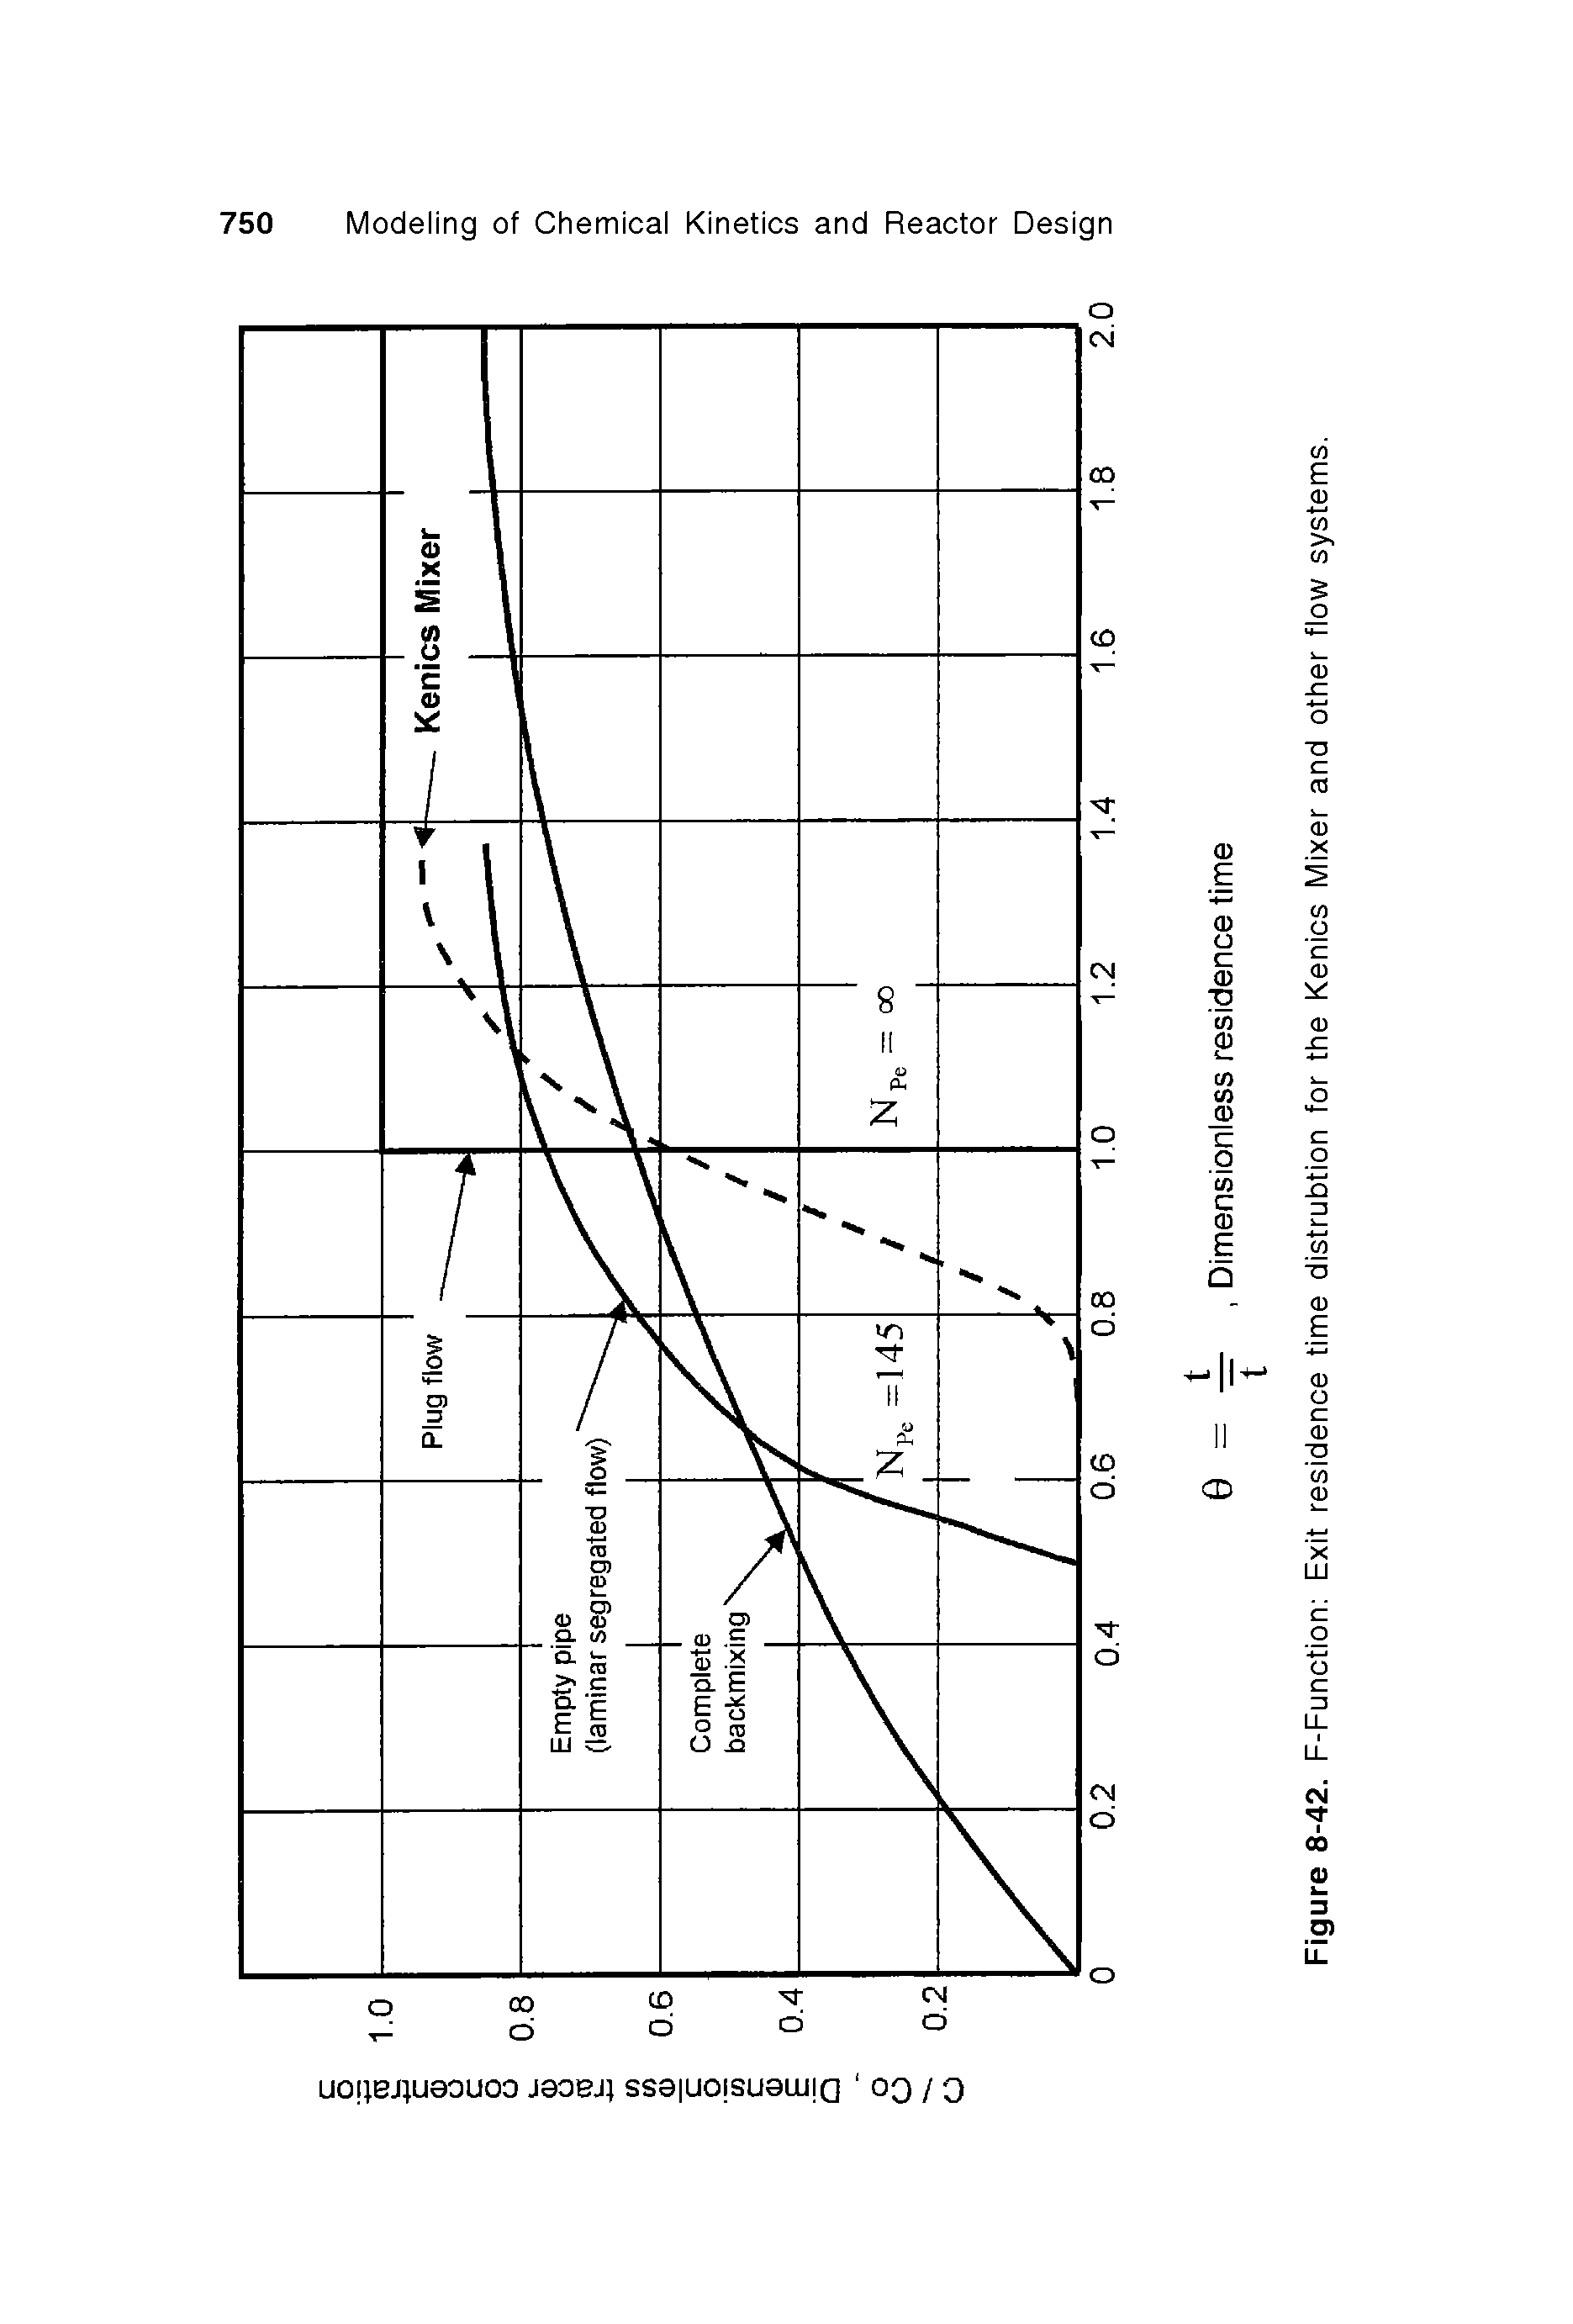 Figure 8-42. F-Function Exit residence time distrubtion for the Kenics Mixer and other flow systems.